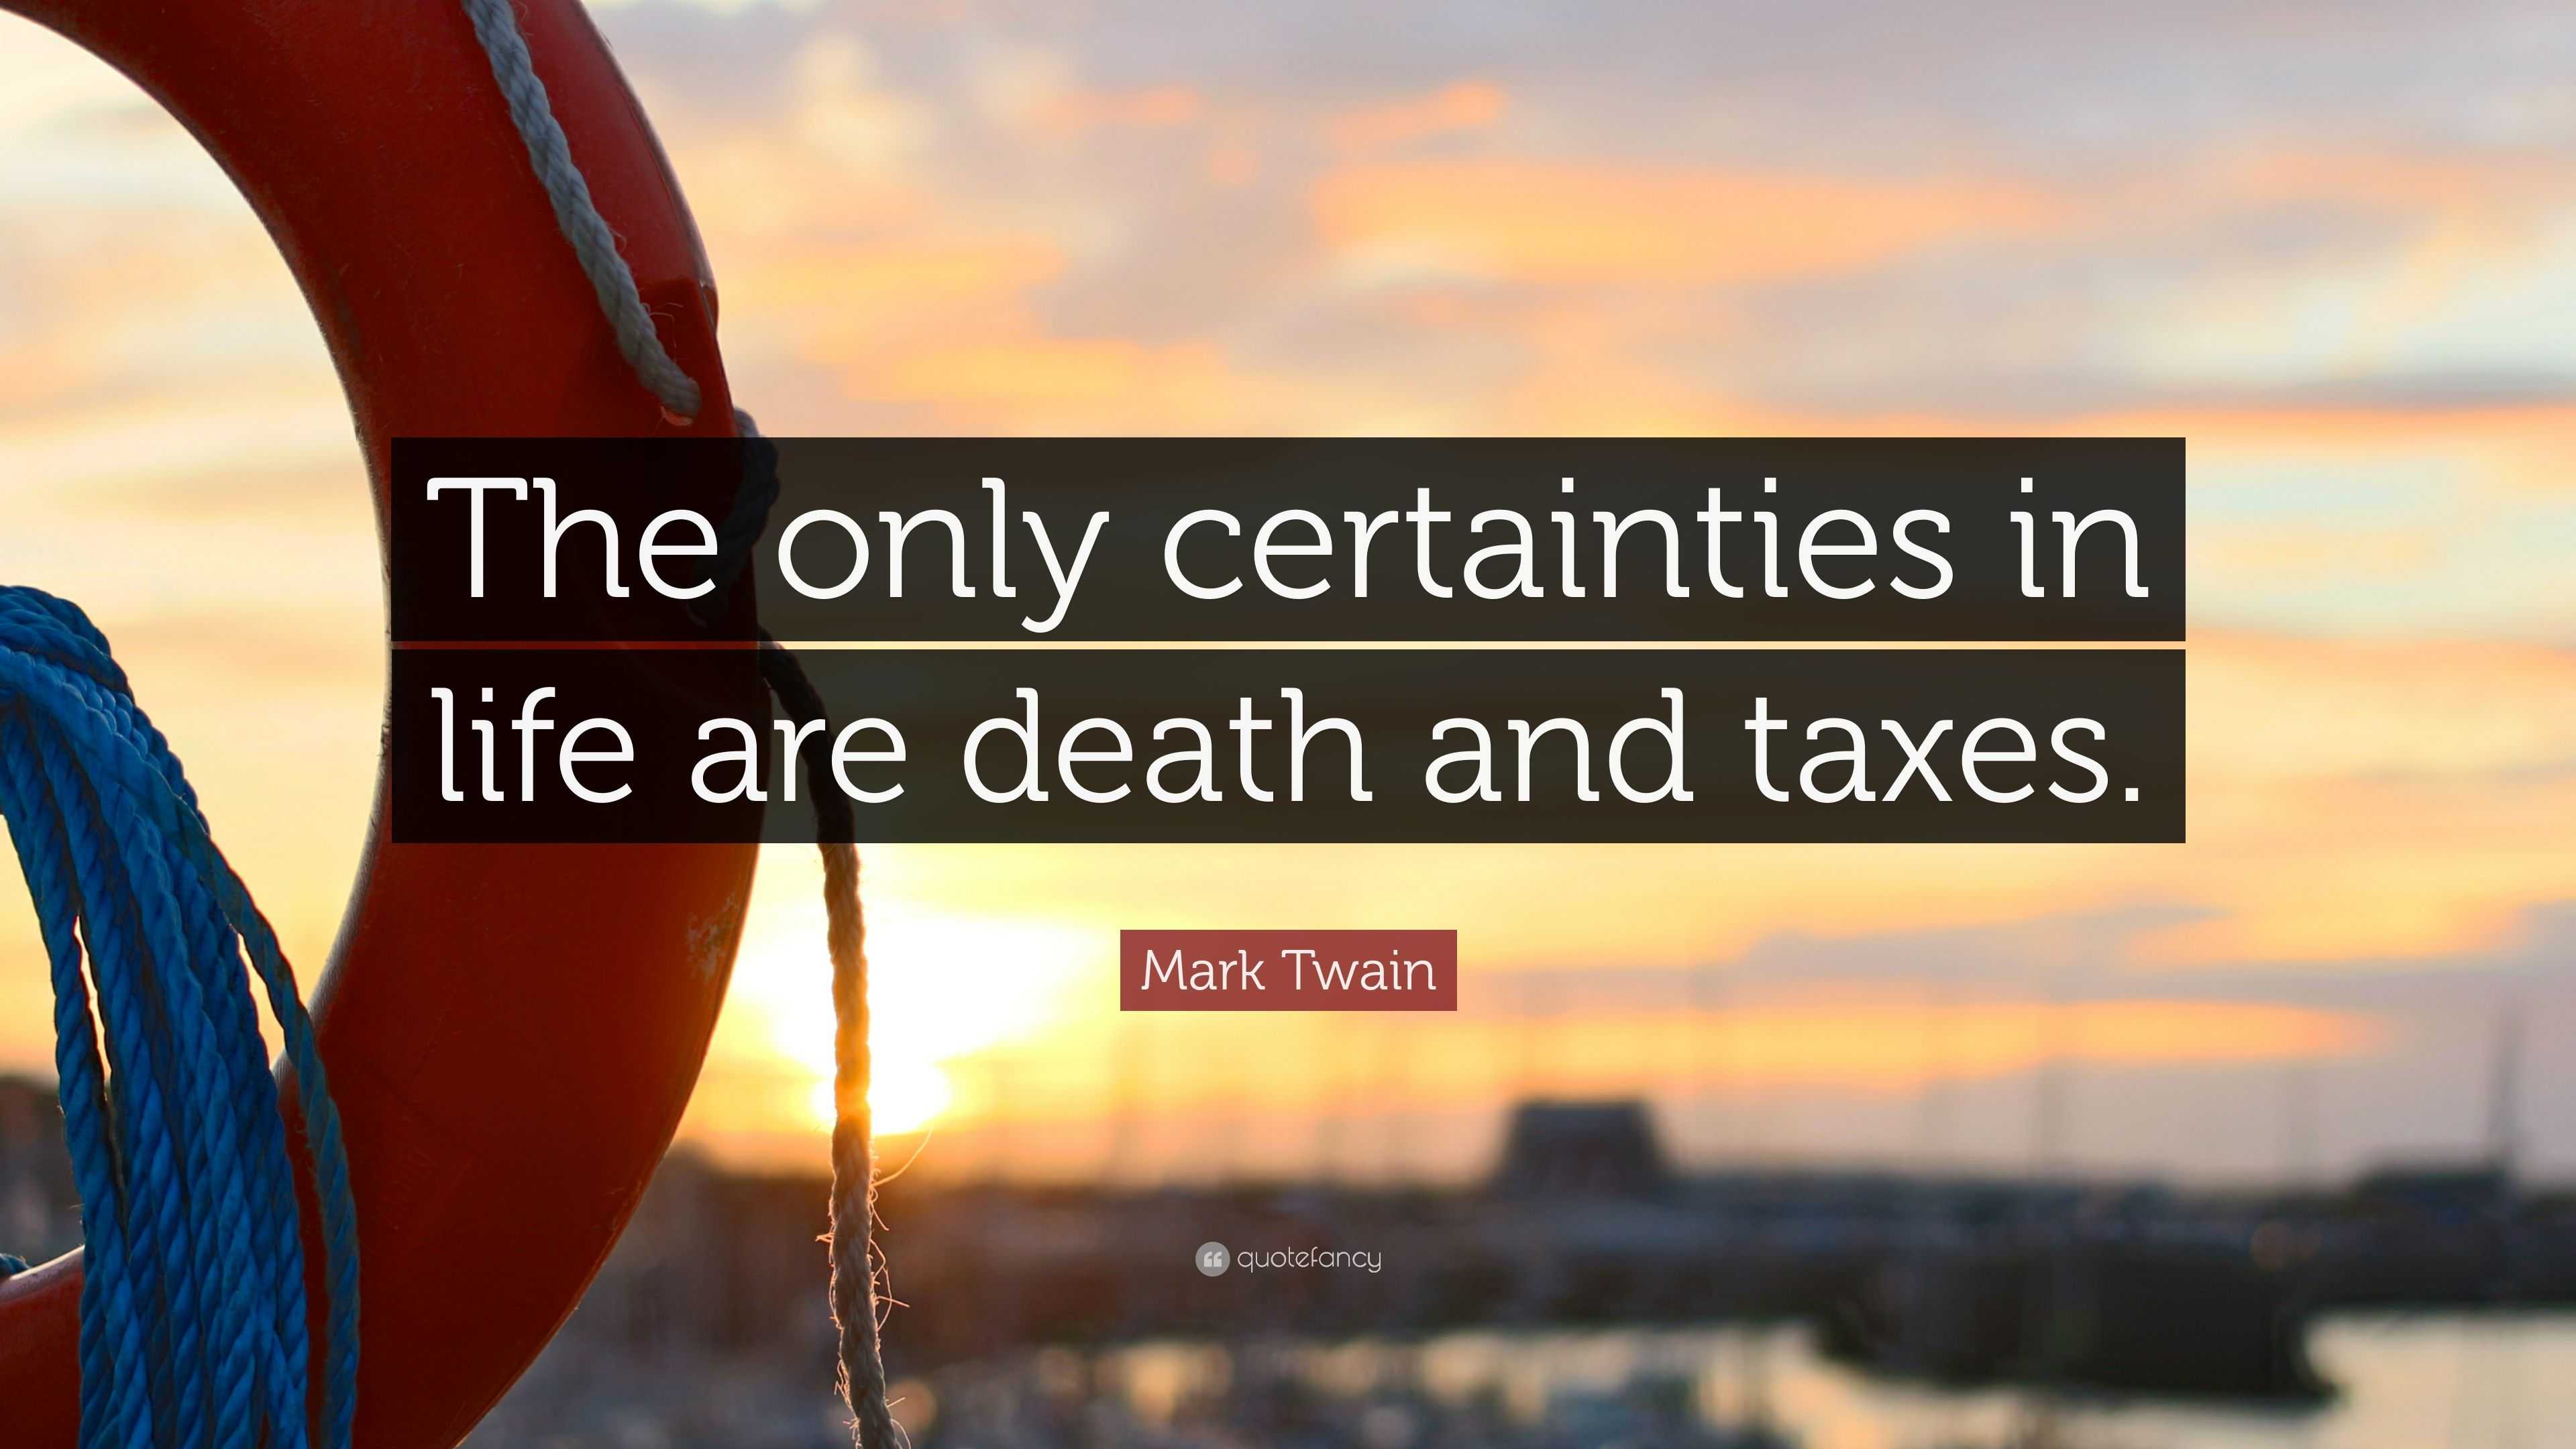 Mark Twain Quote “The only certainties in life are and taxes ”